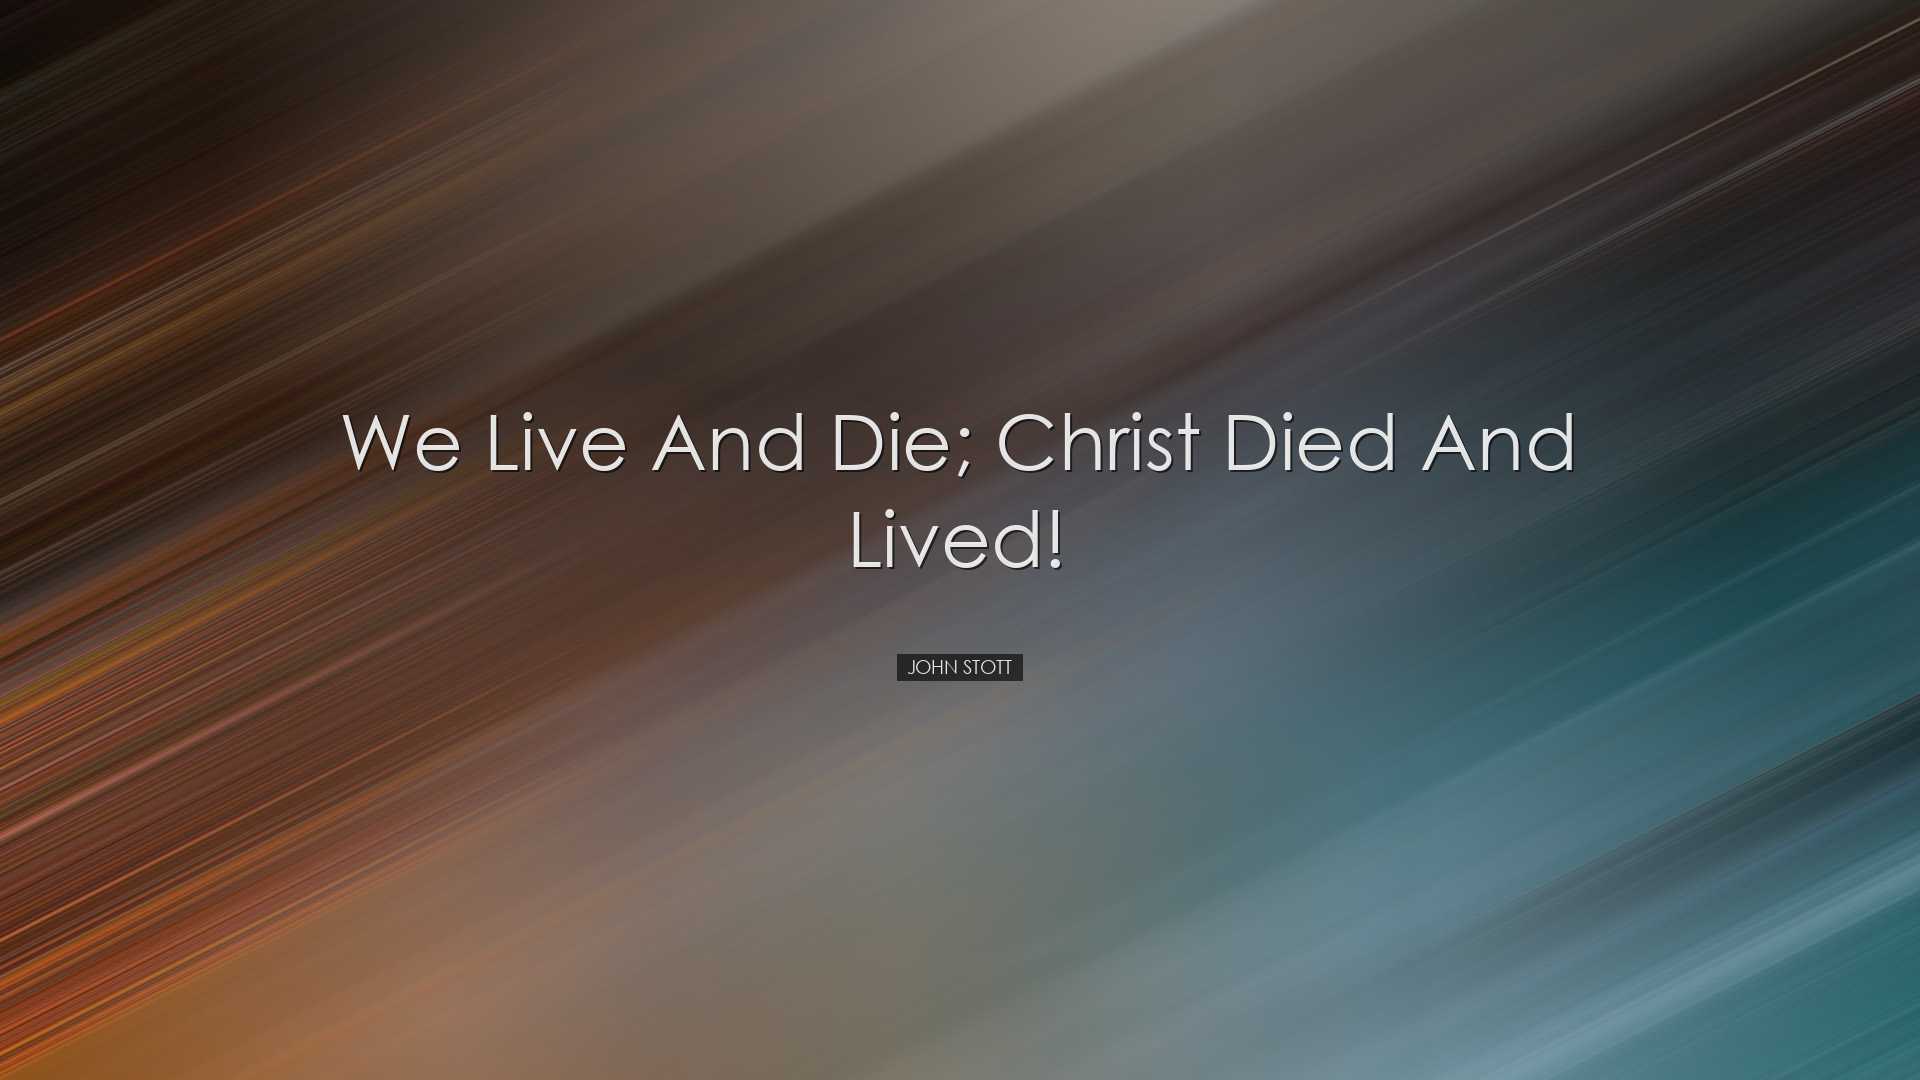 We live and die; Christ died and lived! - John Stott